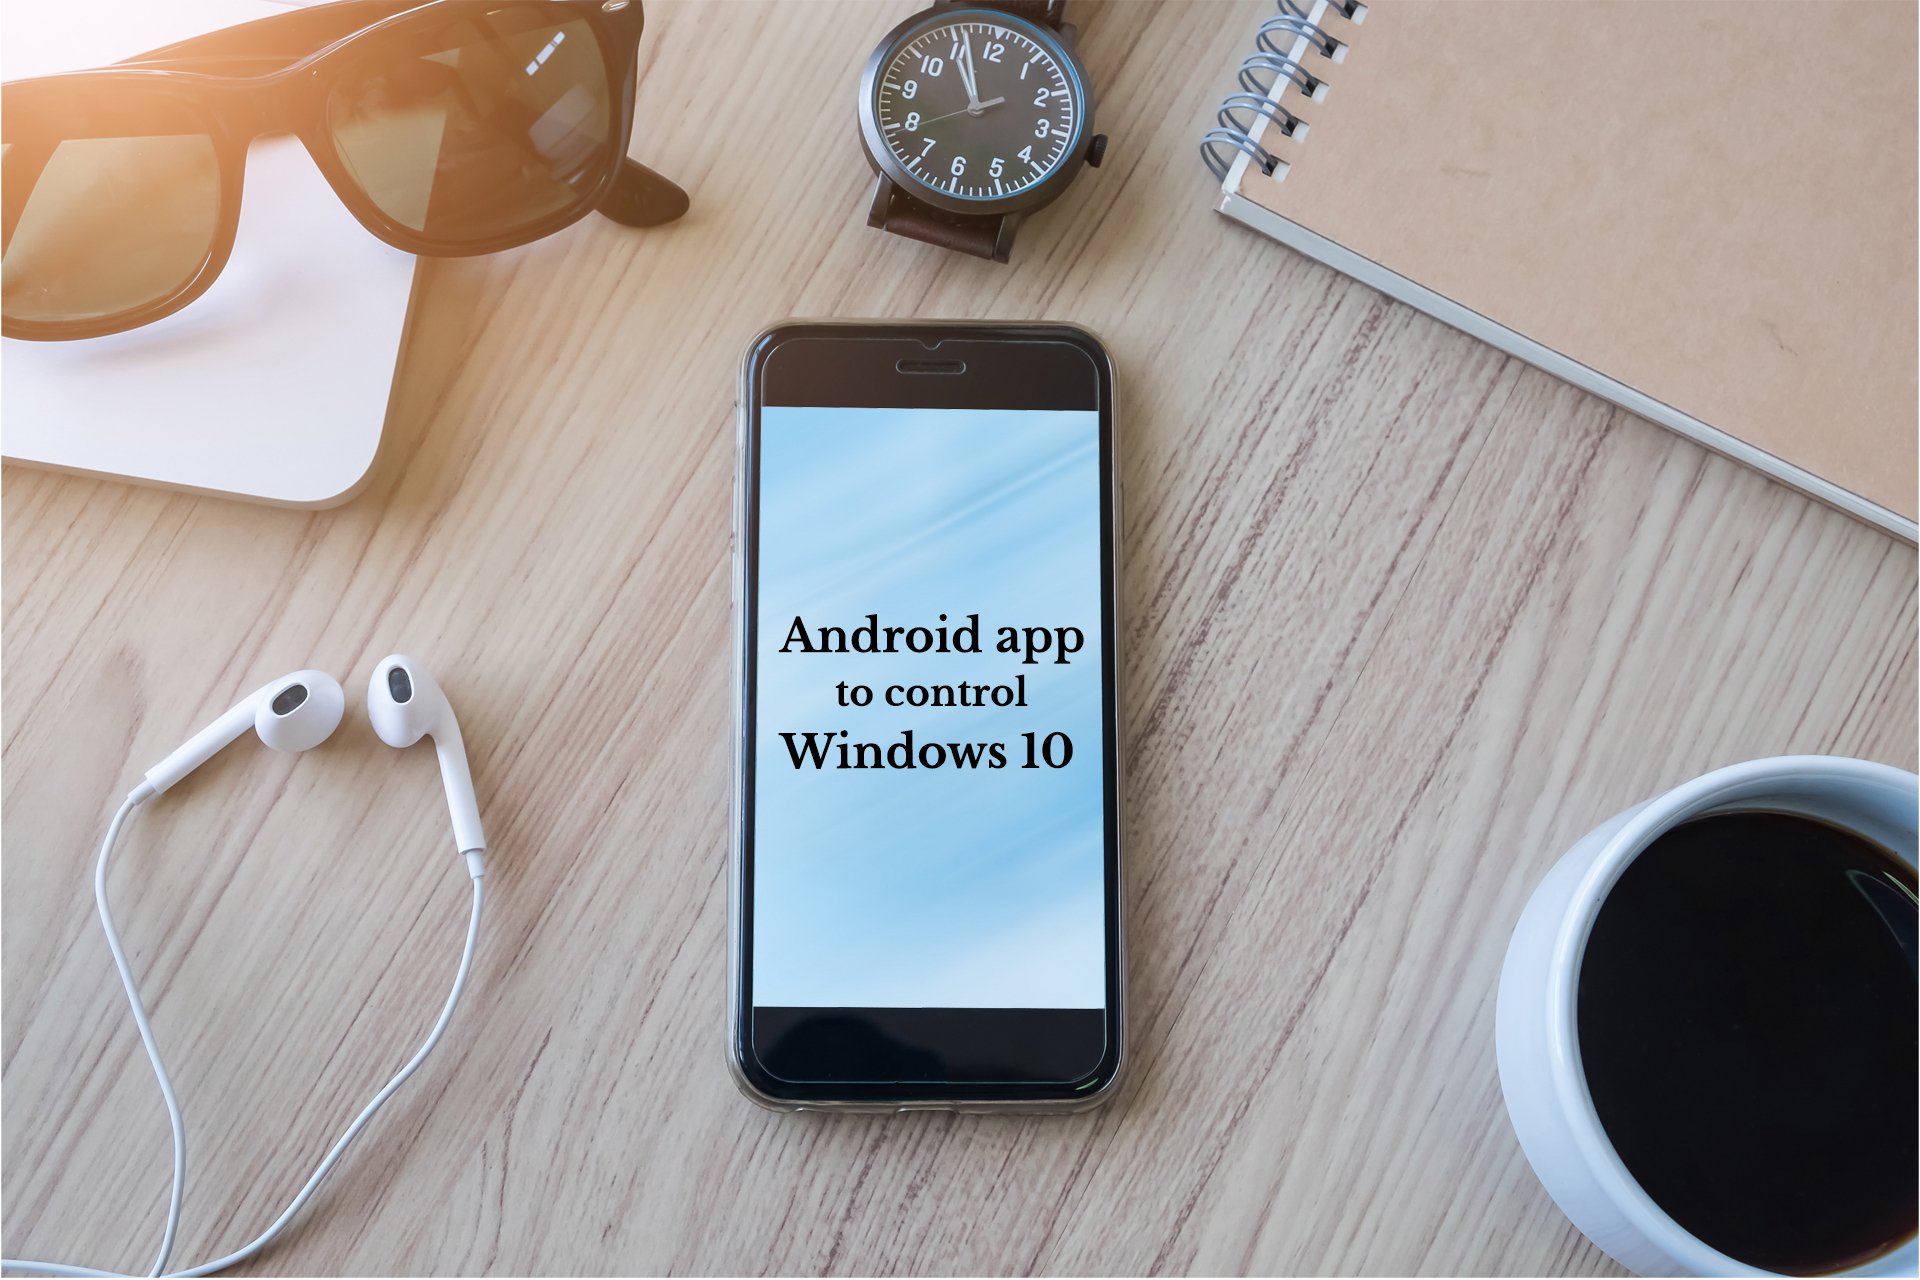 Android apps to control Windows 10